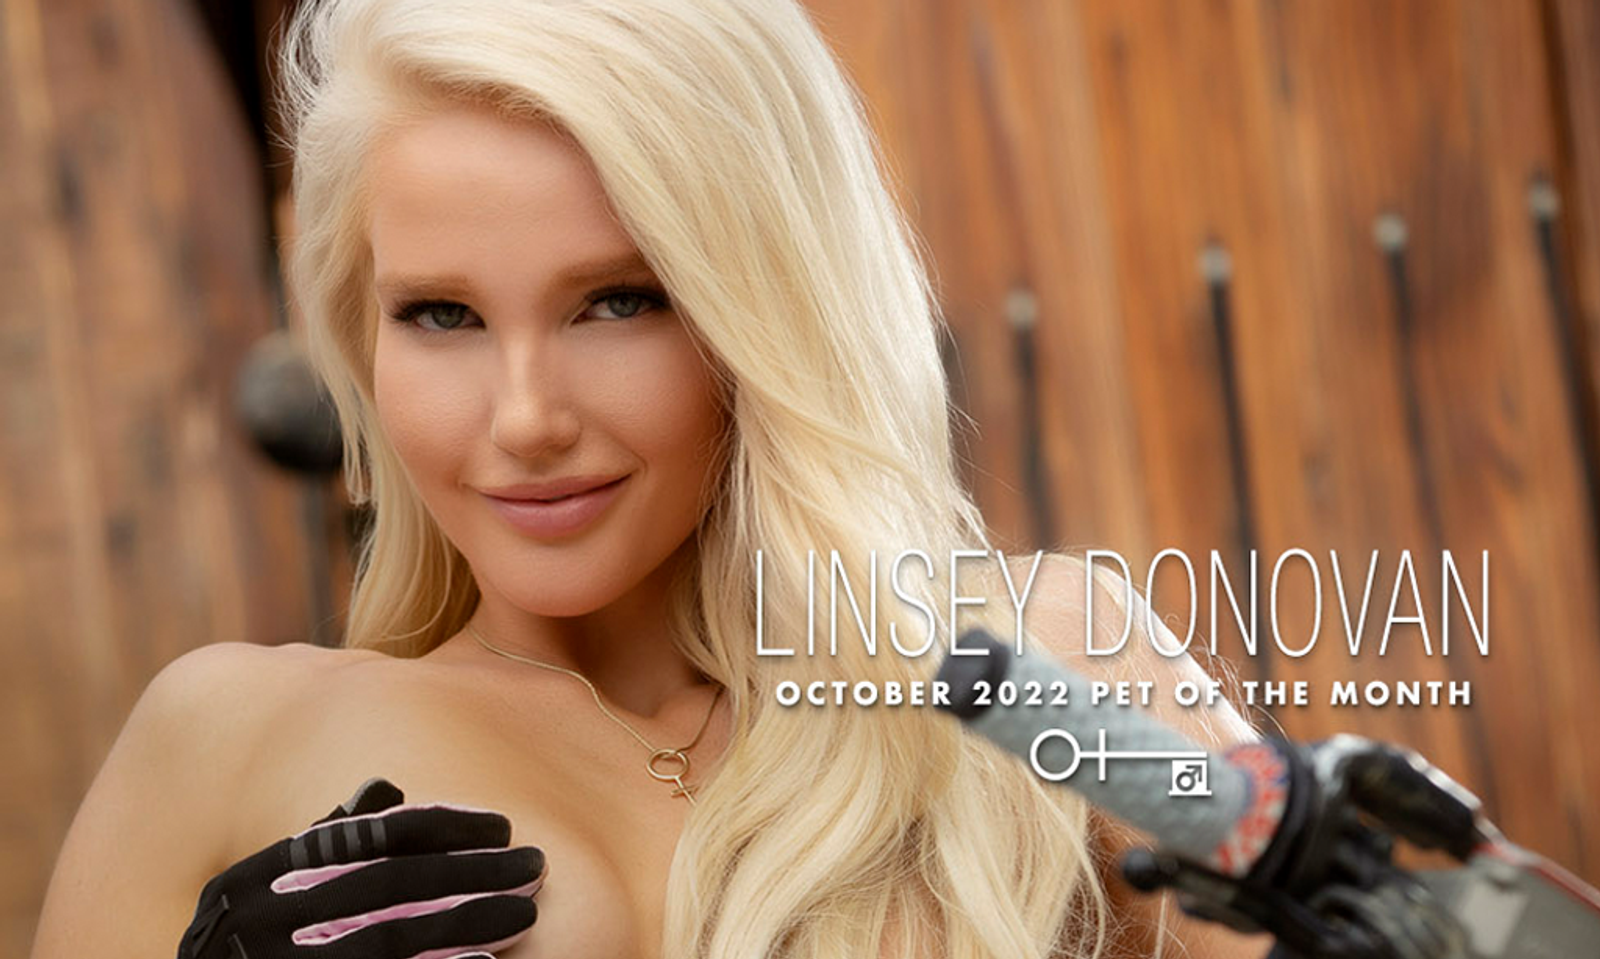 Penthouse Announces Linsey Donovan as October Pet of the Month